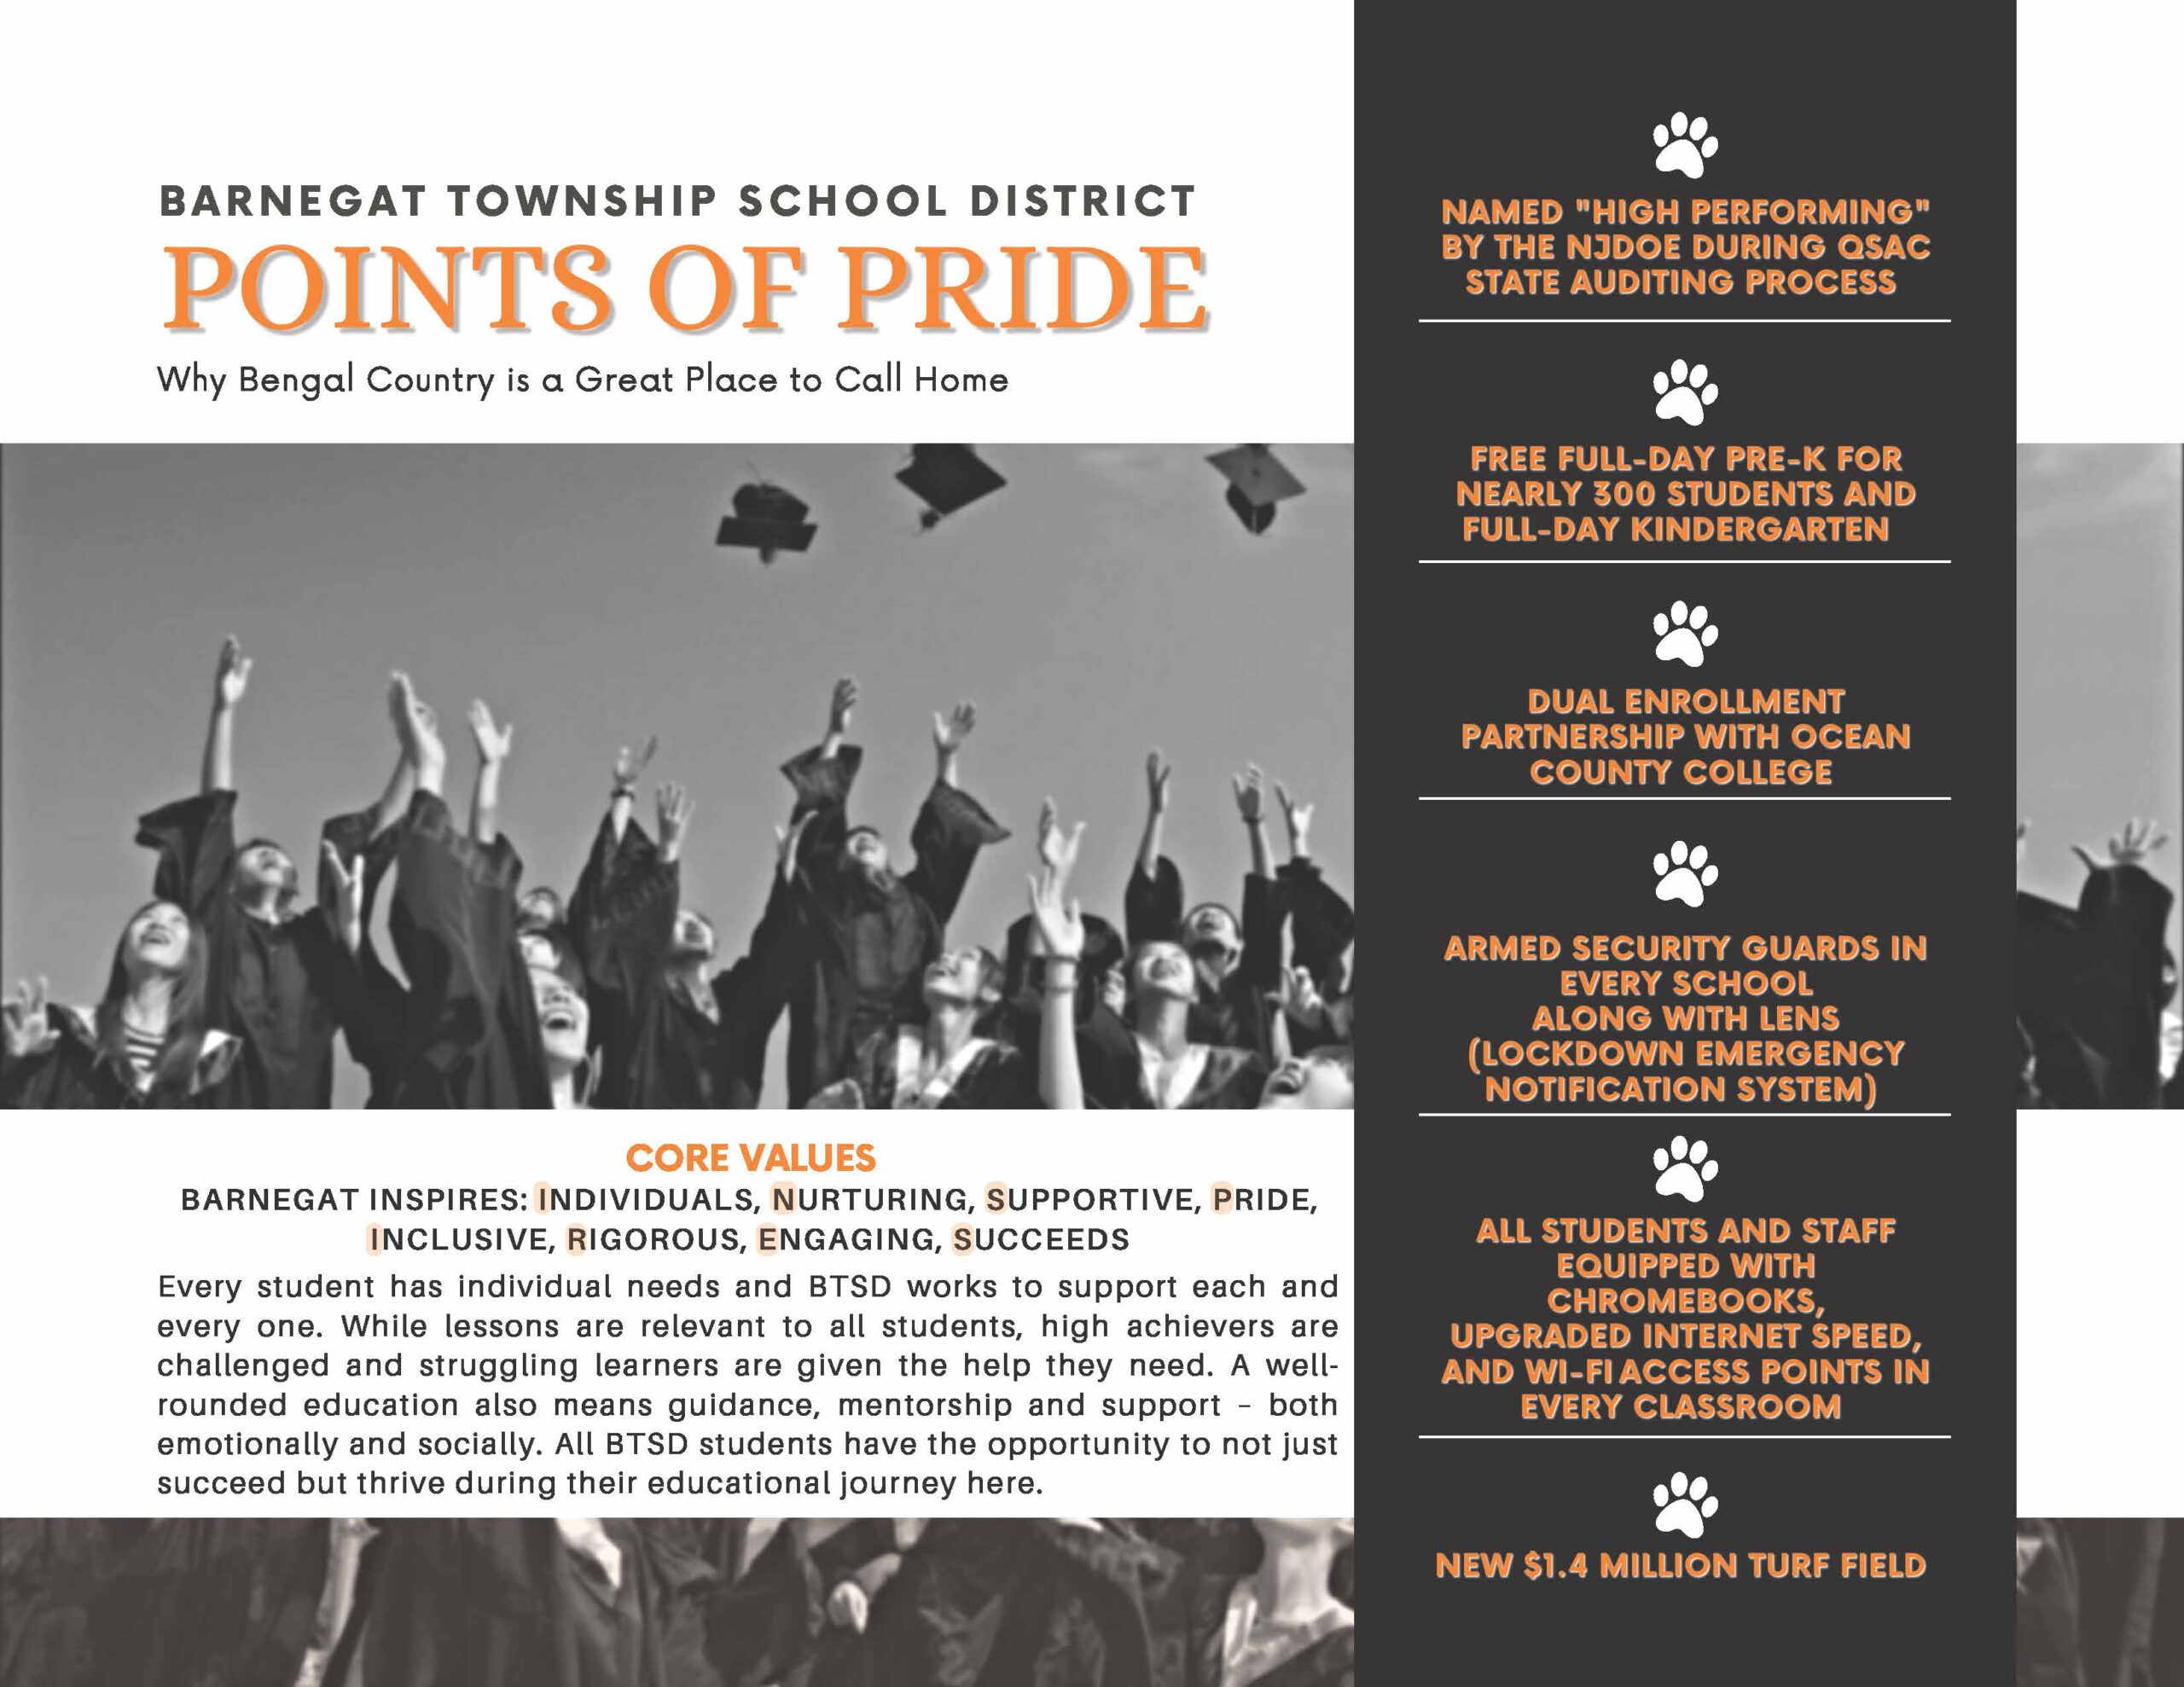 A black and white image of students throwing up their caps during a graduation ceremony is accompanied by information about points of pride that the Barnegat Township School District celebrates. 